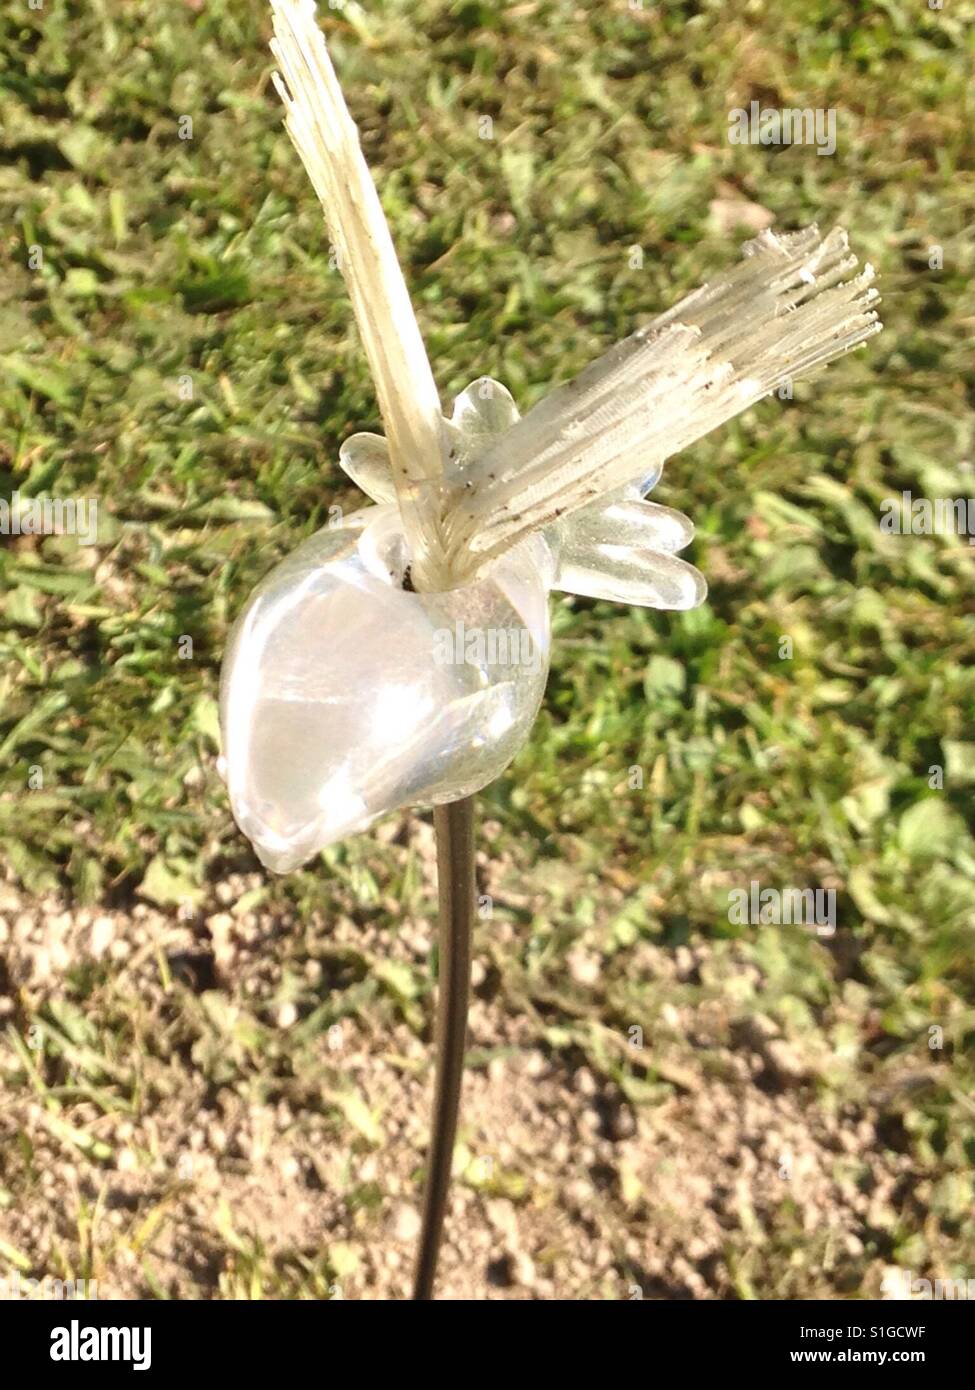 Glass bird on a stick in a yard Stock Photo